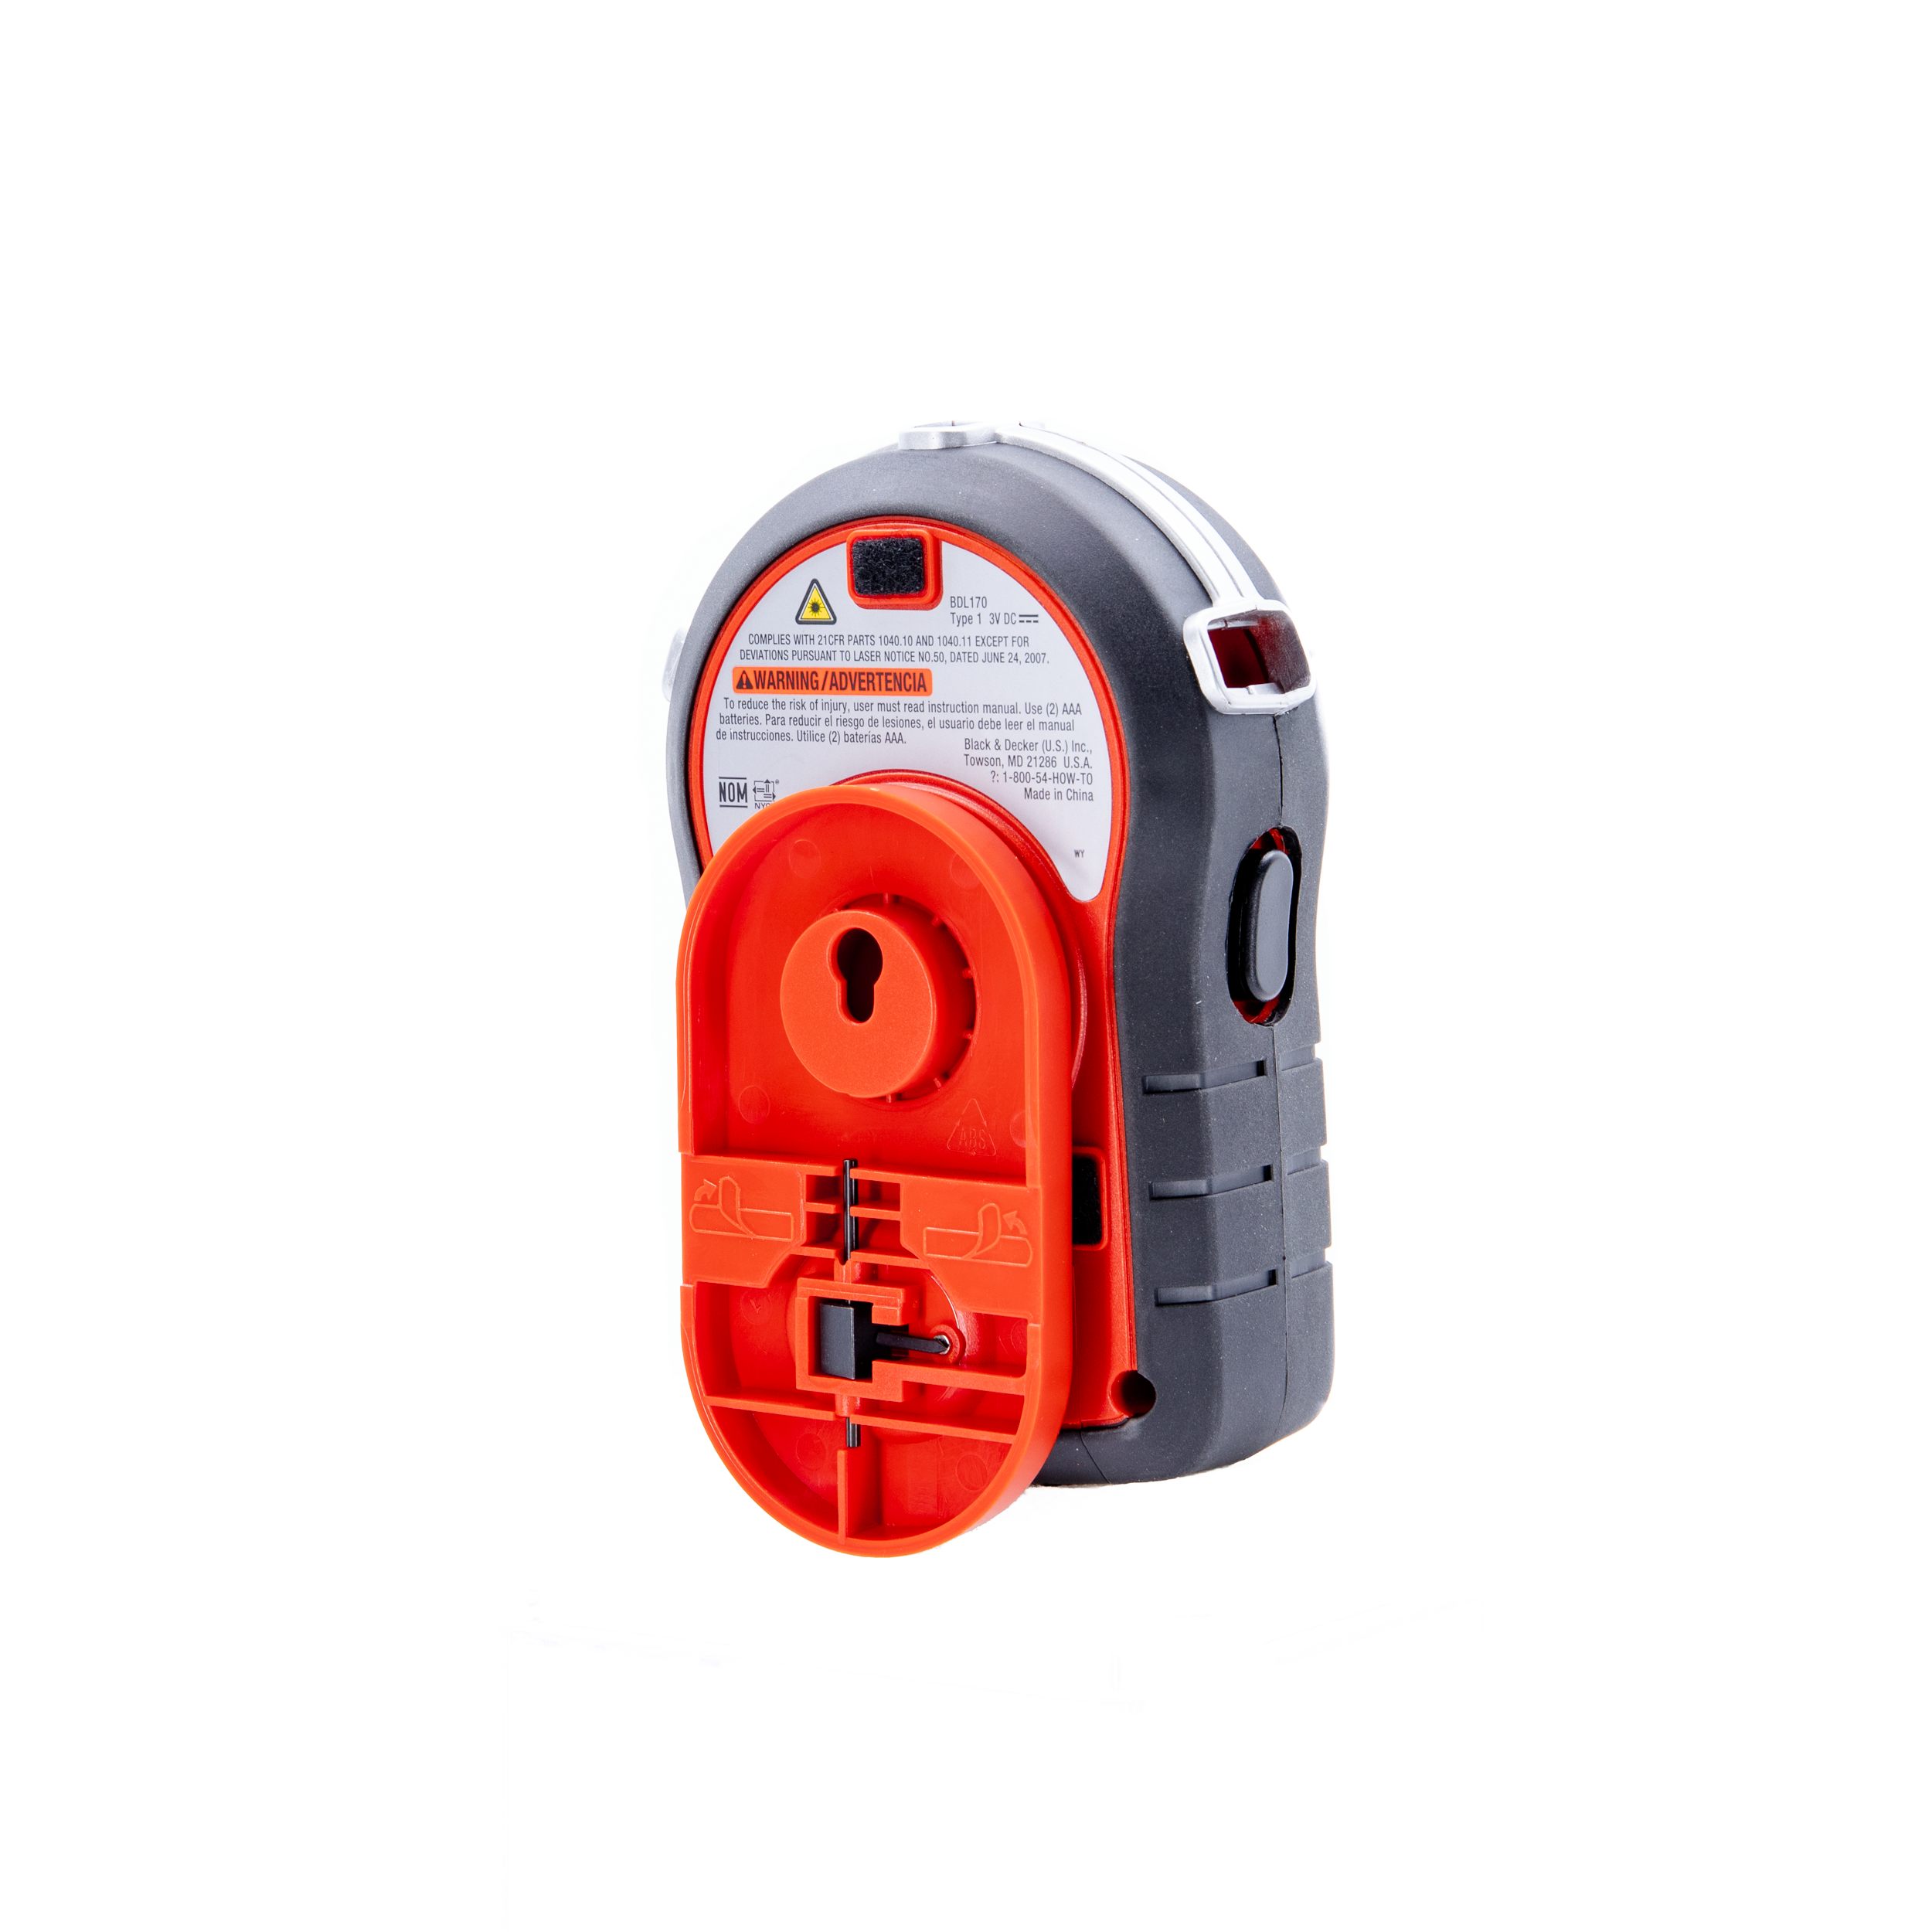 BLACK+DECKER BullsEye Auto-Leveling Laser with AnglePro (BDL170) - Line  Lasers 